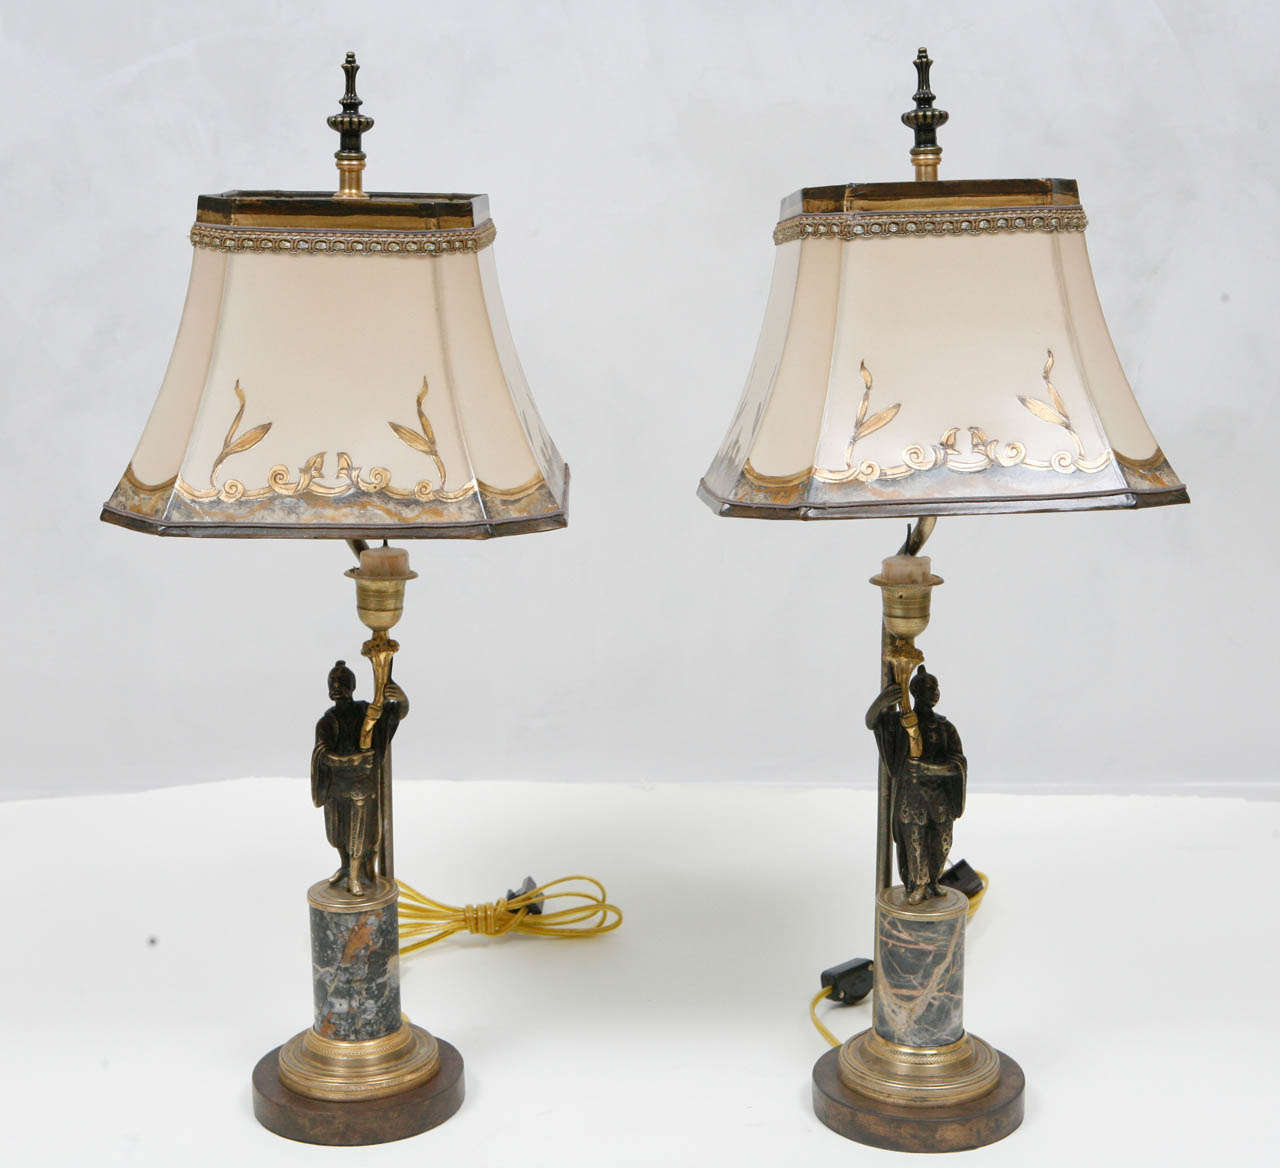 Pair of 19th c. French Bronze and Marble Candlesticks converted to Lamps. The base measurement is 4.5 inches.  The Shades are included and are Hand Made of Parchment Paper. They are Hand Gilded and Decorated. The lamps have been newly wired.